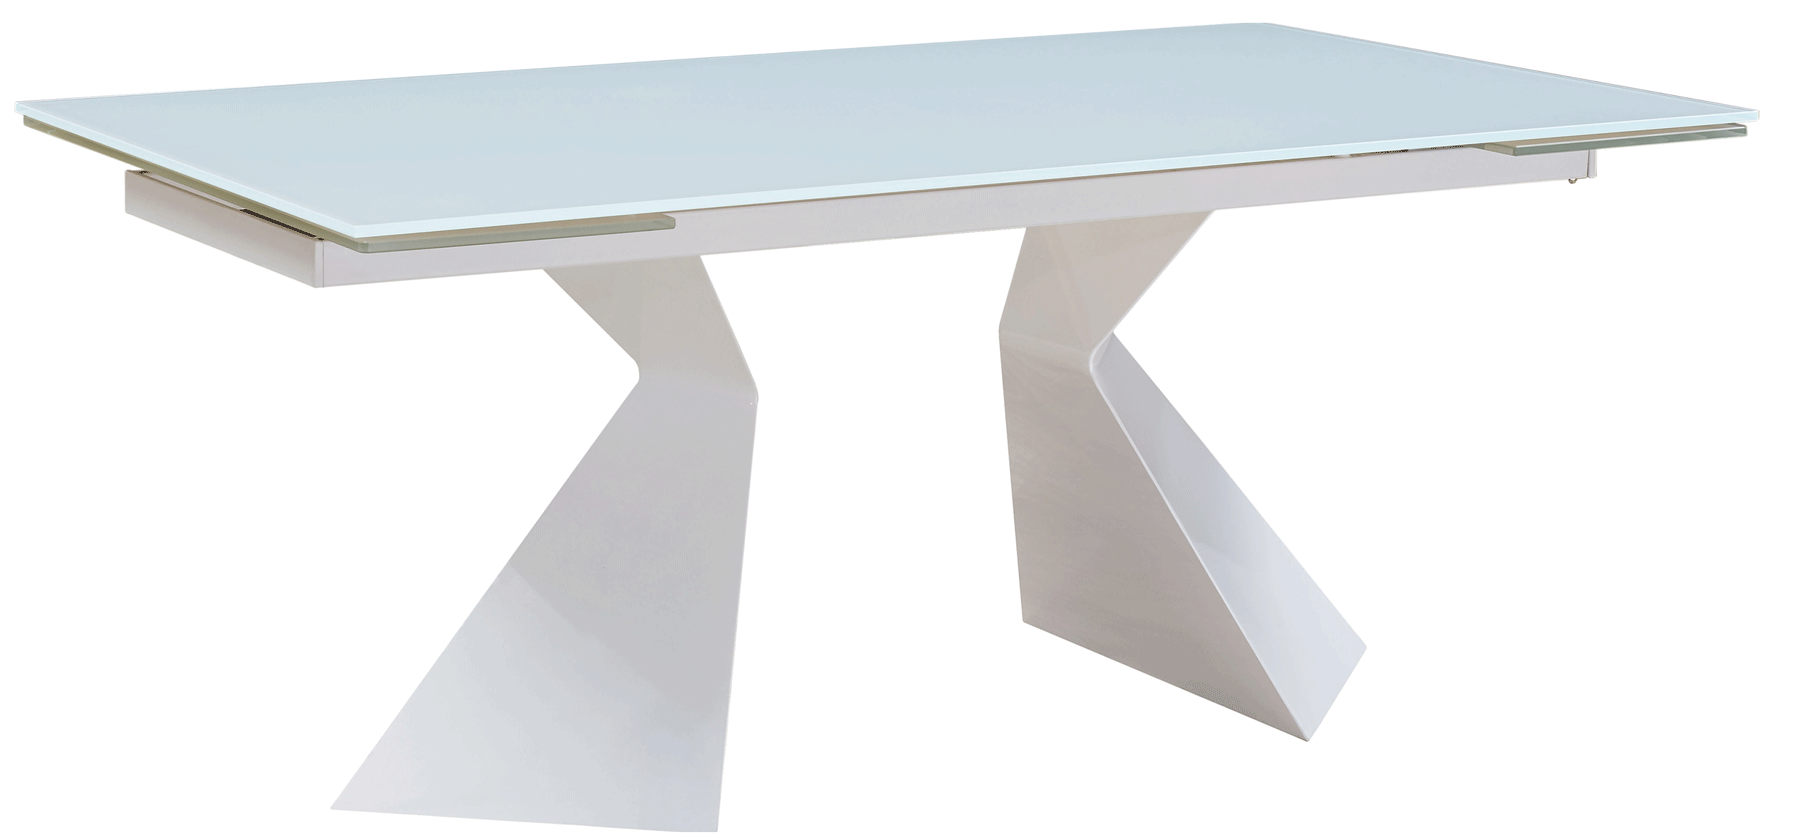 Dining Room Furniture Marble-Look Tables 992 Table